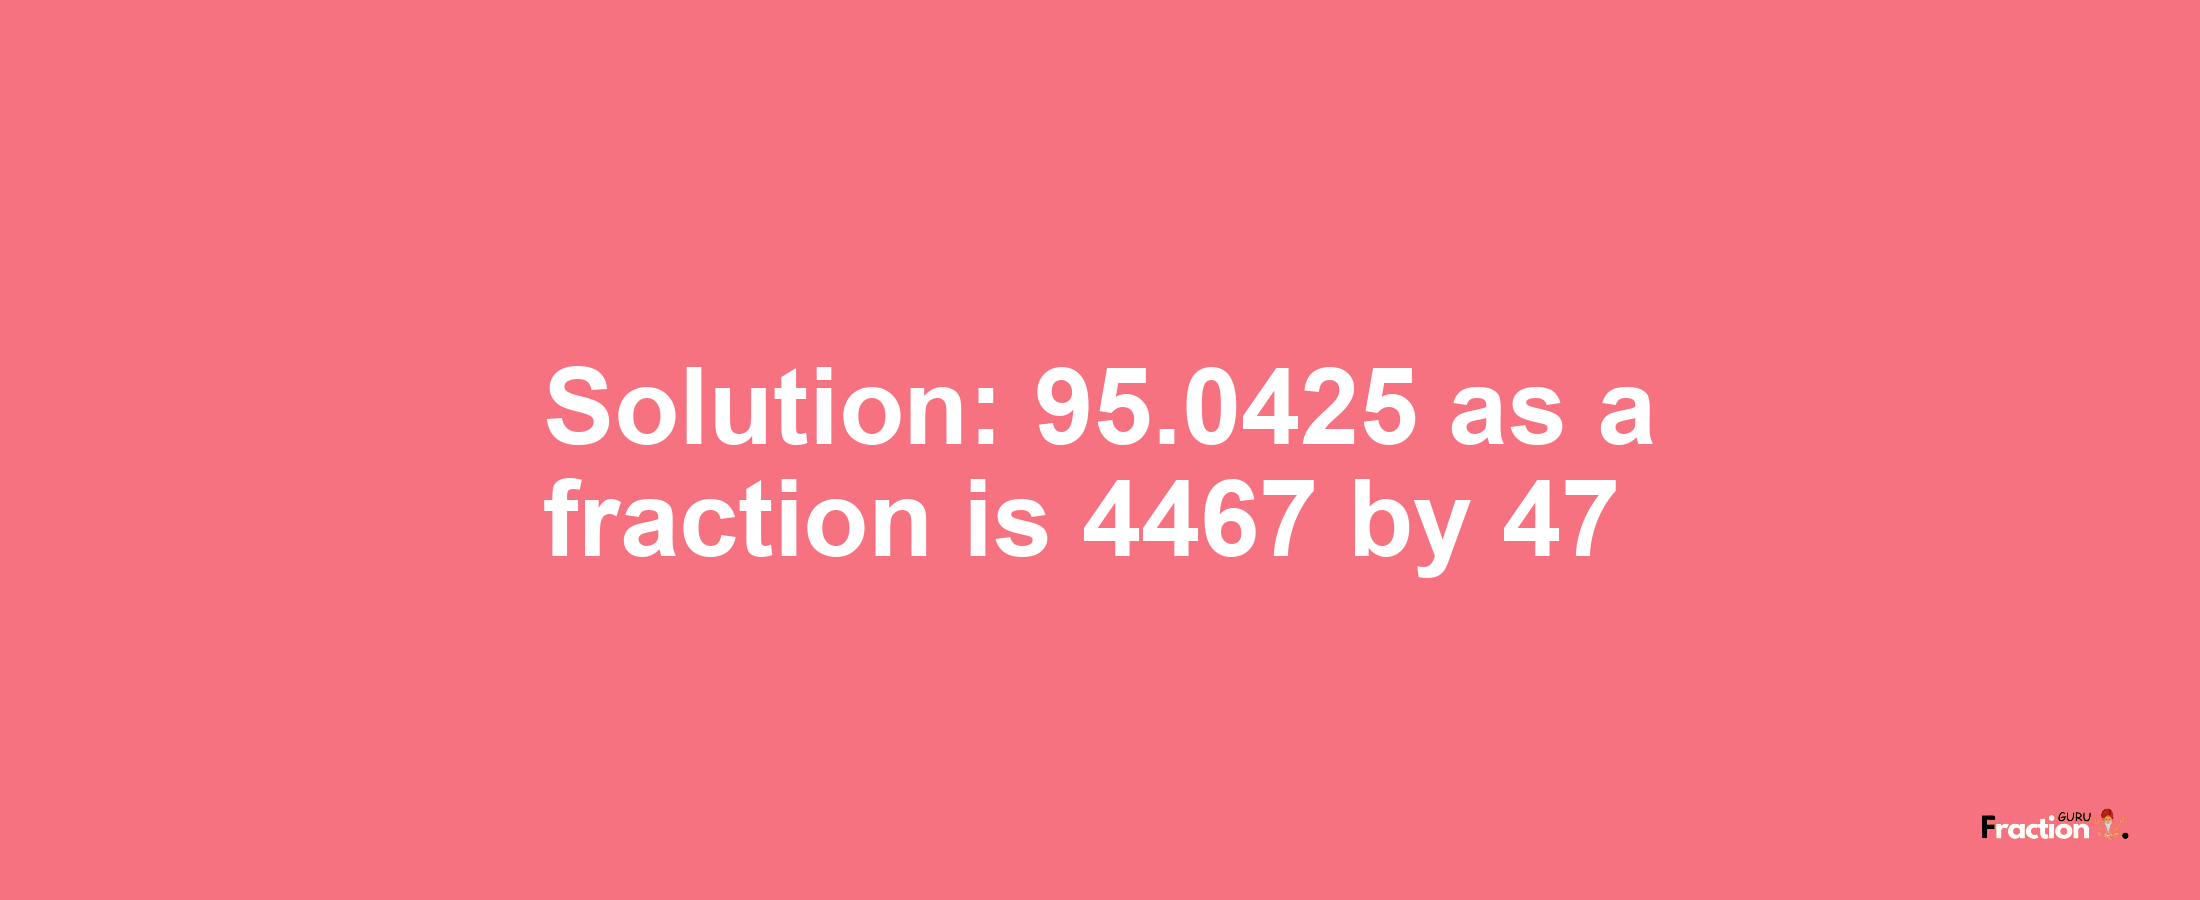 Solution:95.0425 as a fraction is 4467/47